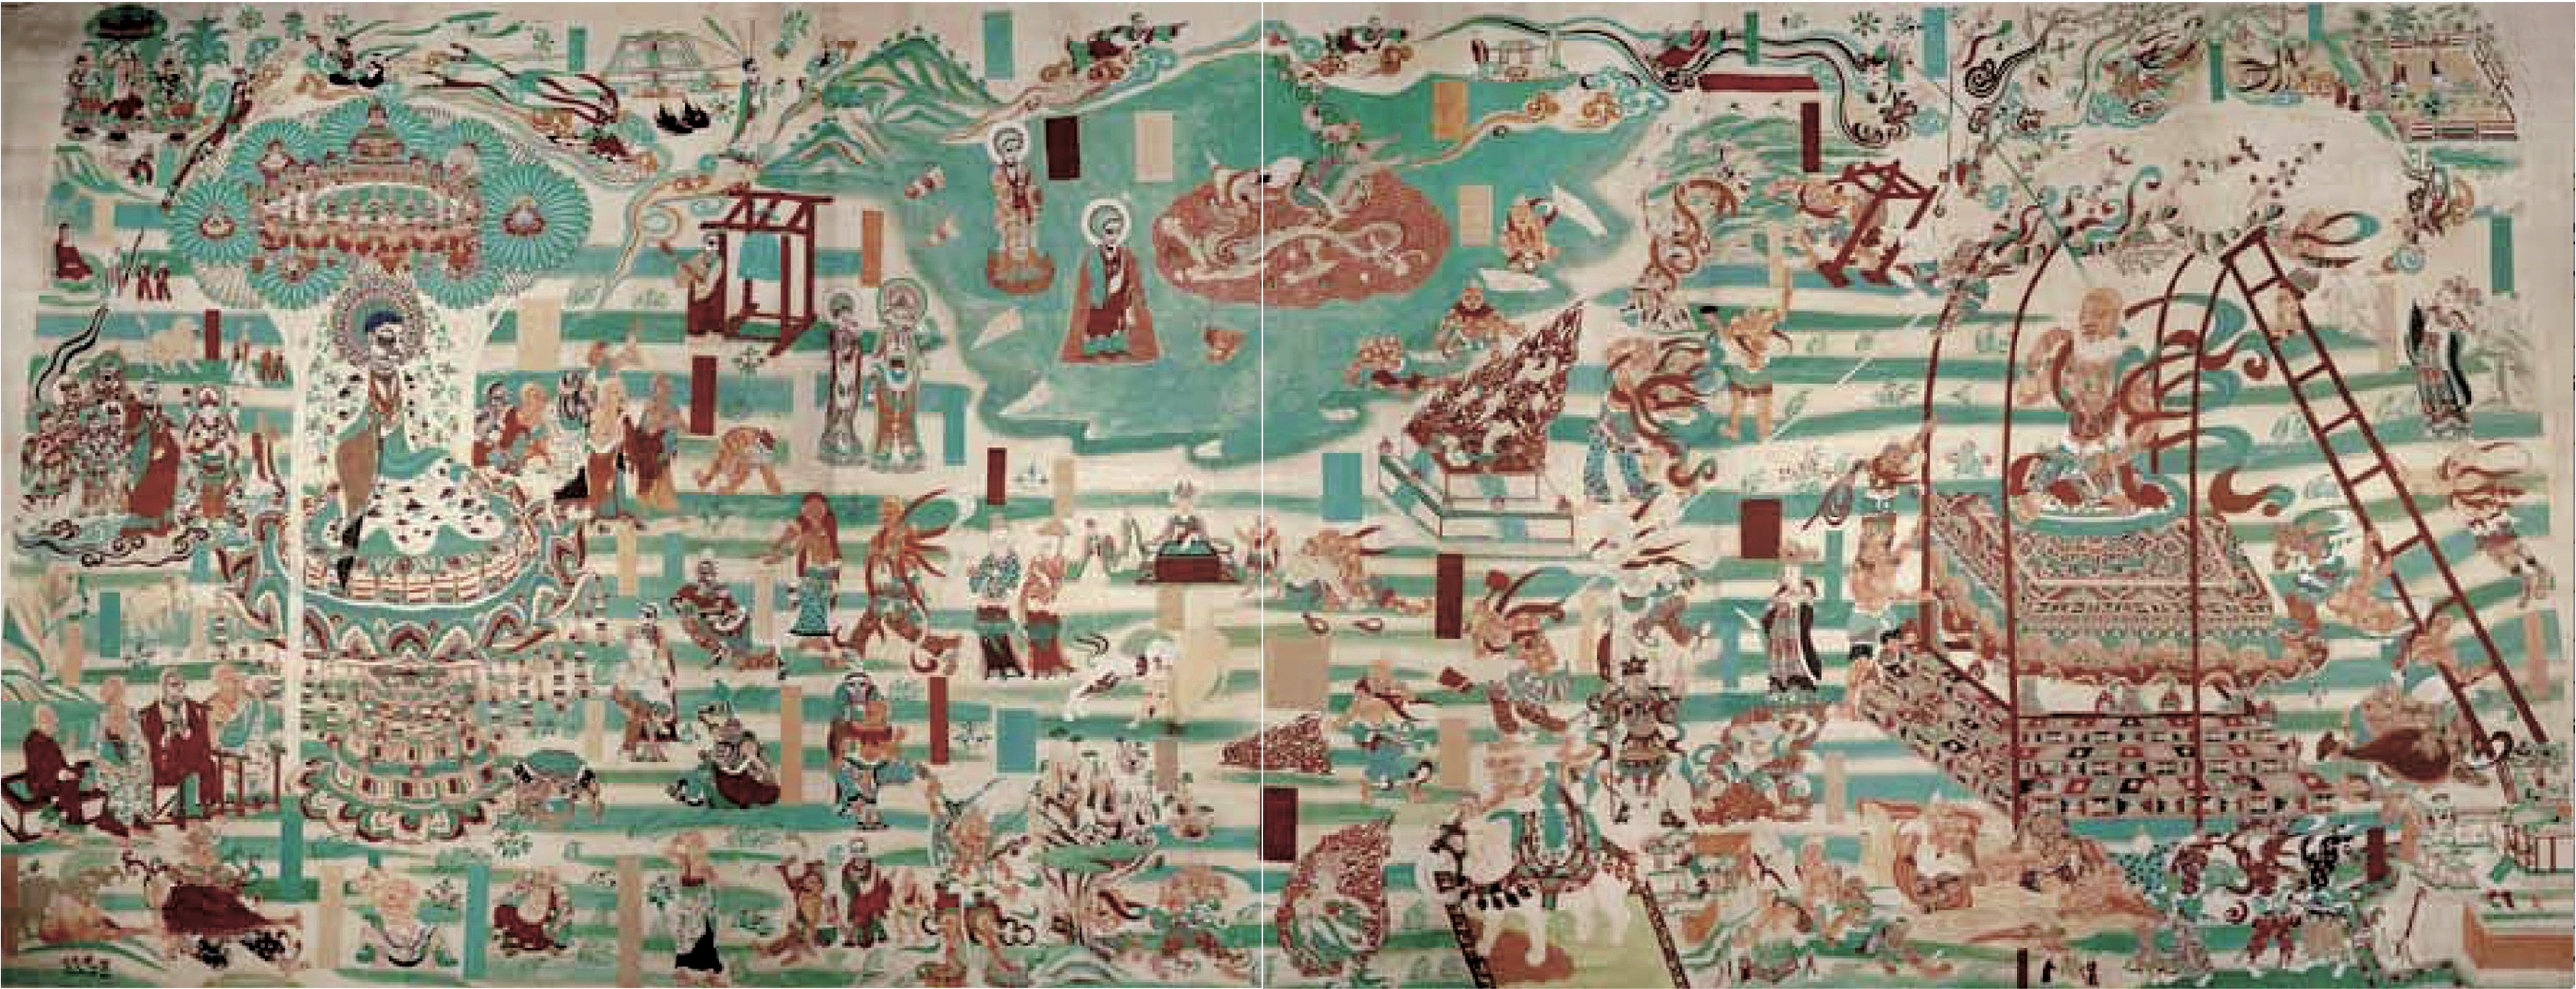 Figure 12: "The Demon in Disguise" in Cave 196 of the Mogao Grottoes, late 9th century